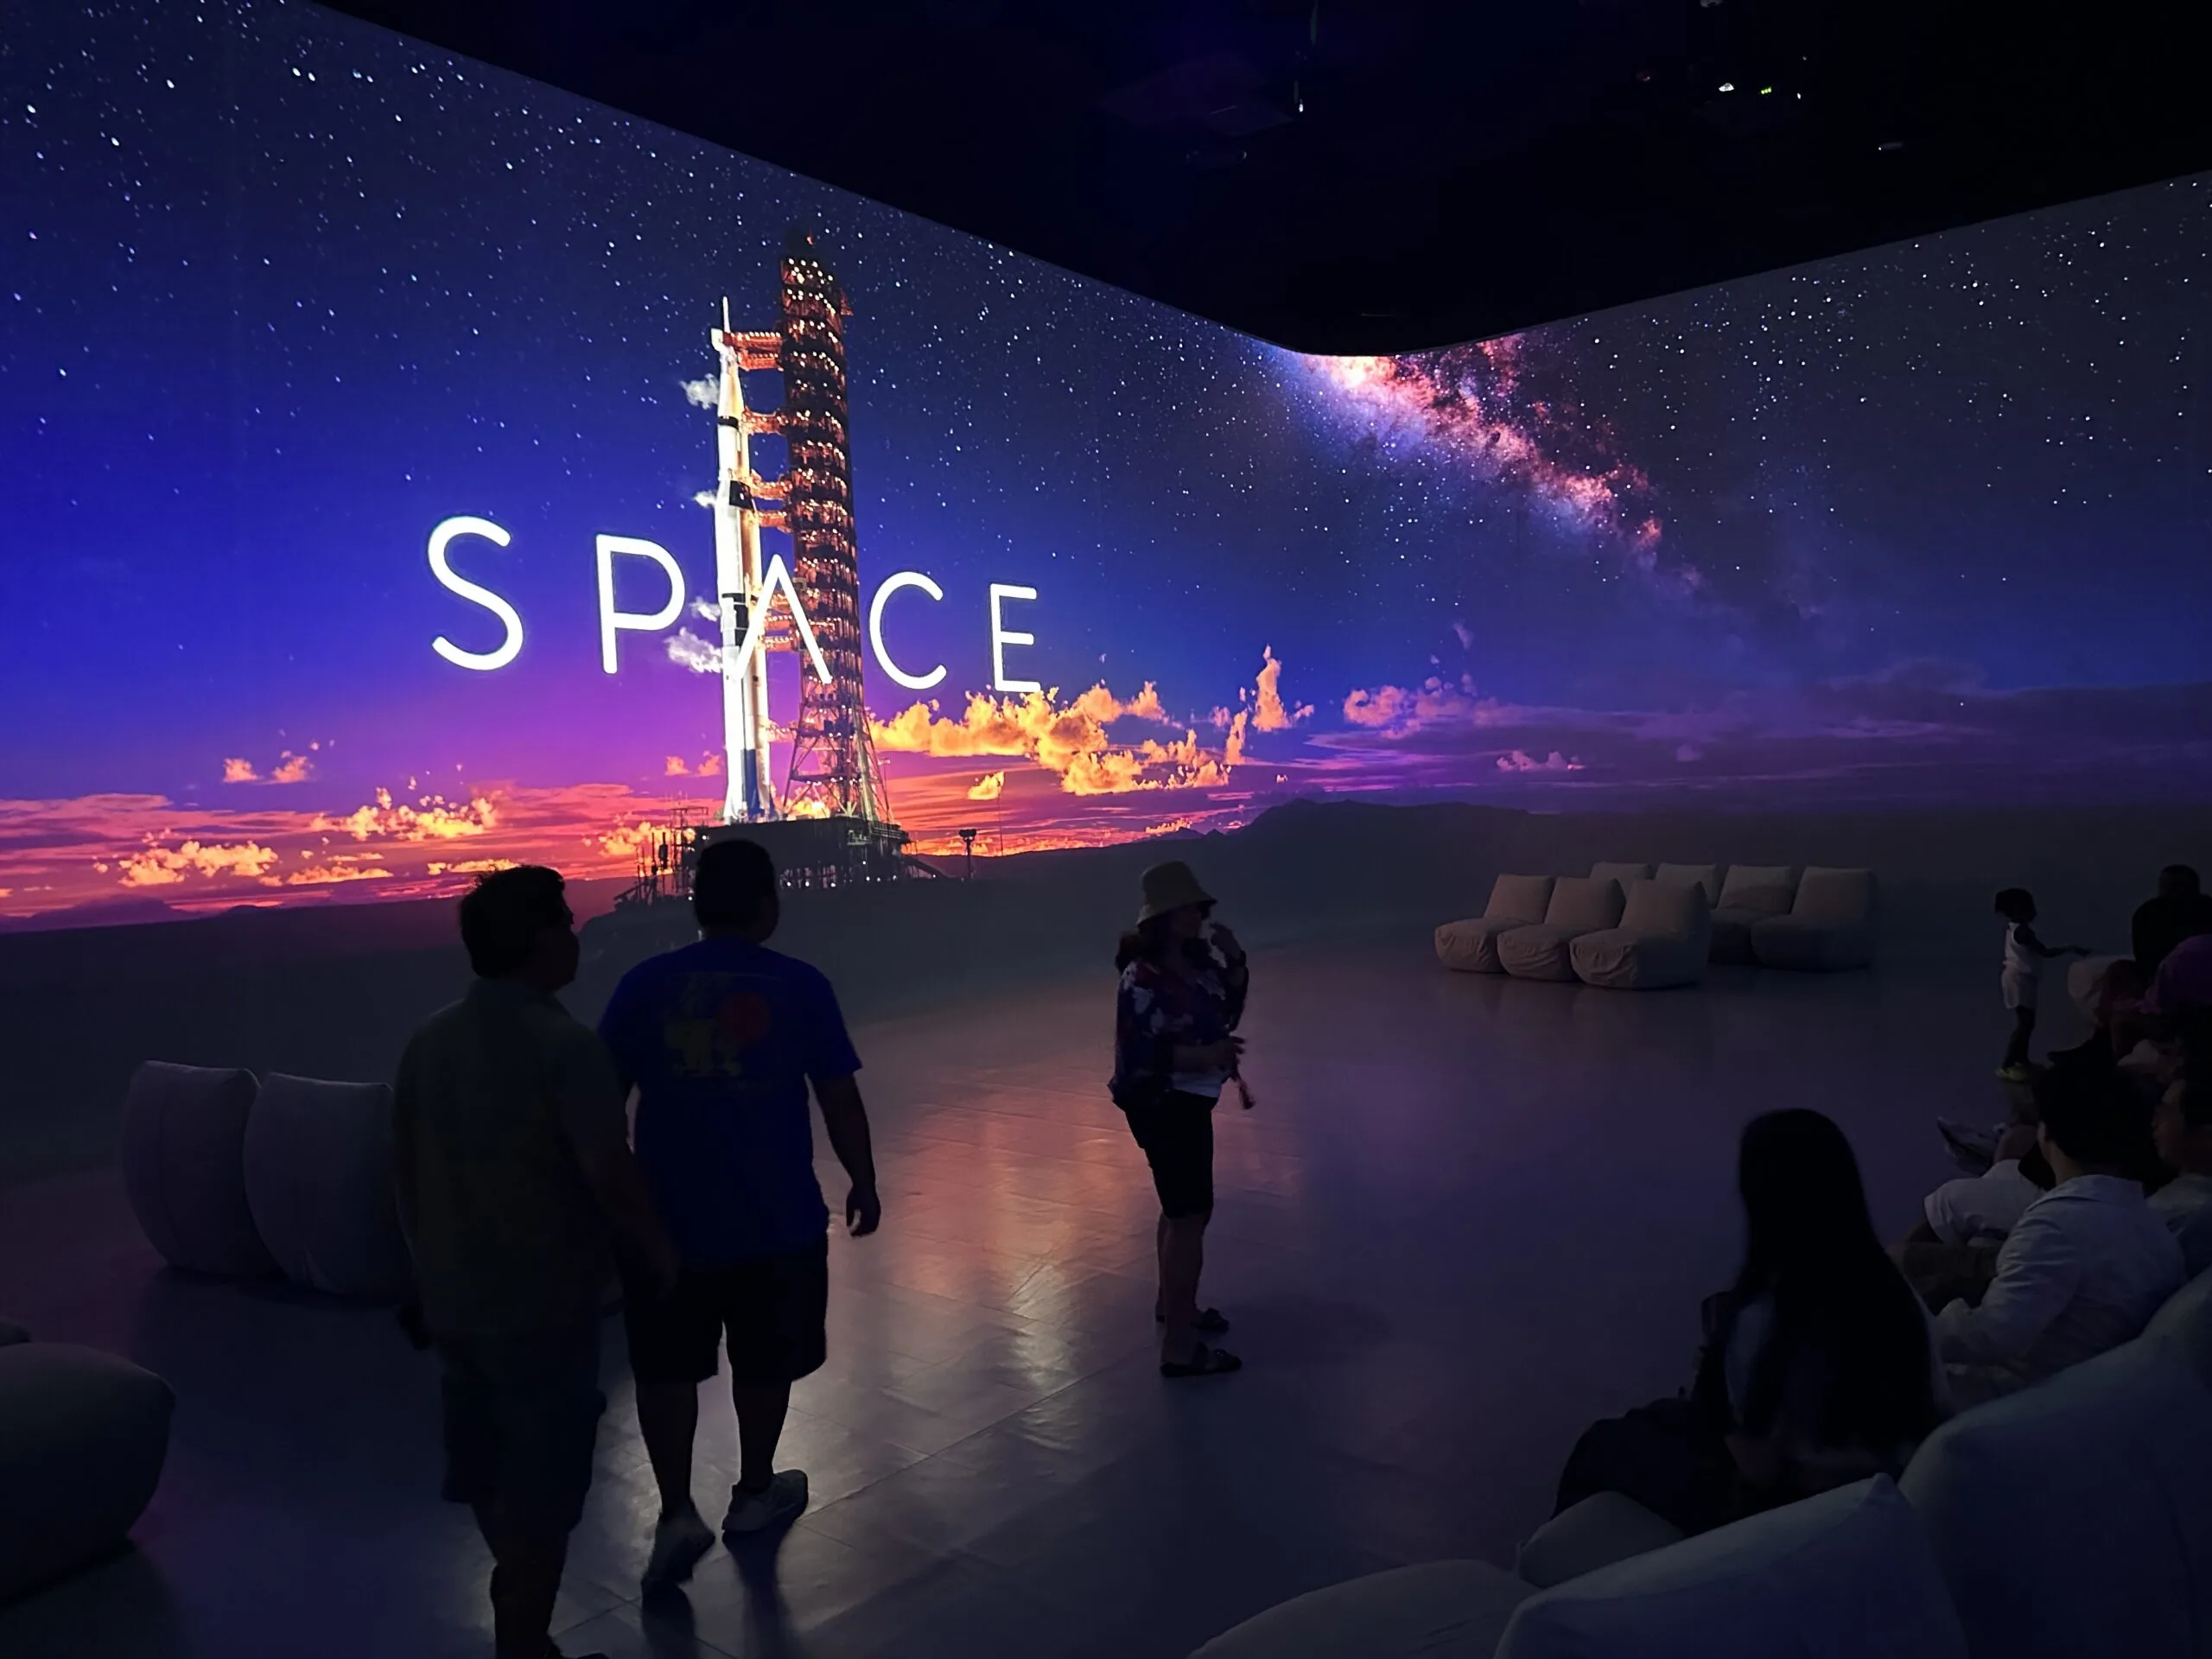 Video screen on the wall illuminates an otherwise dark room. On the screen, a space shuttle ready to take off is pictured along with the word 